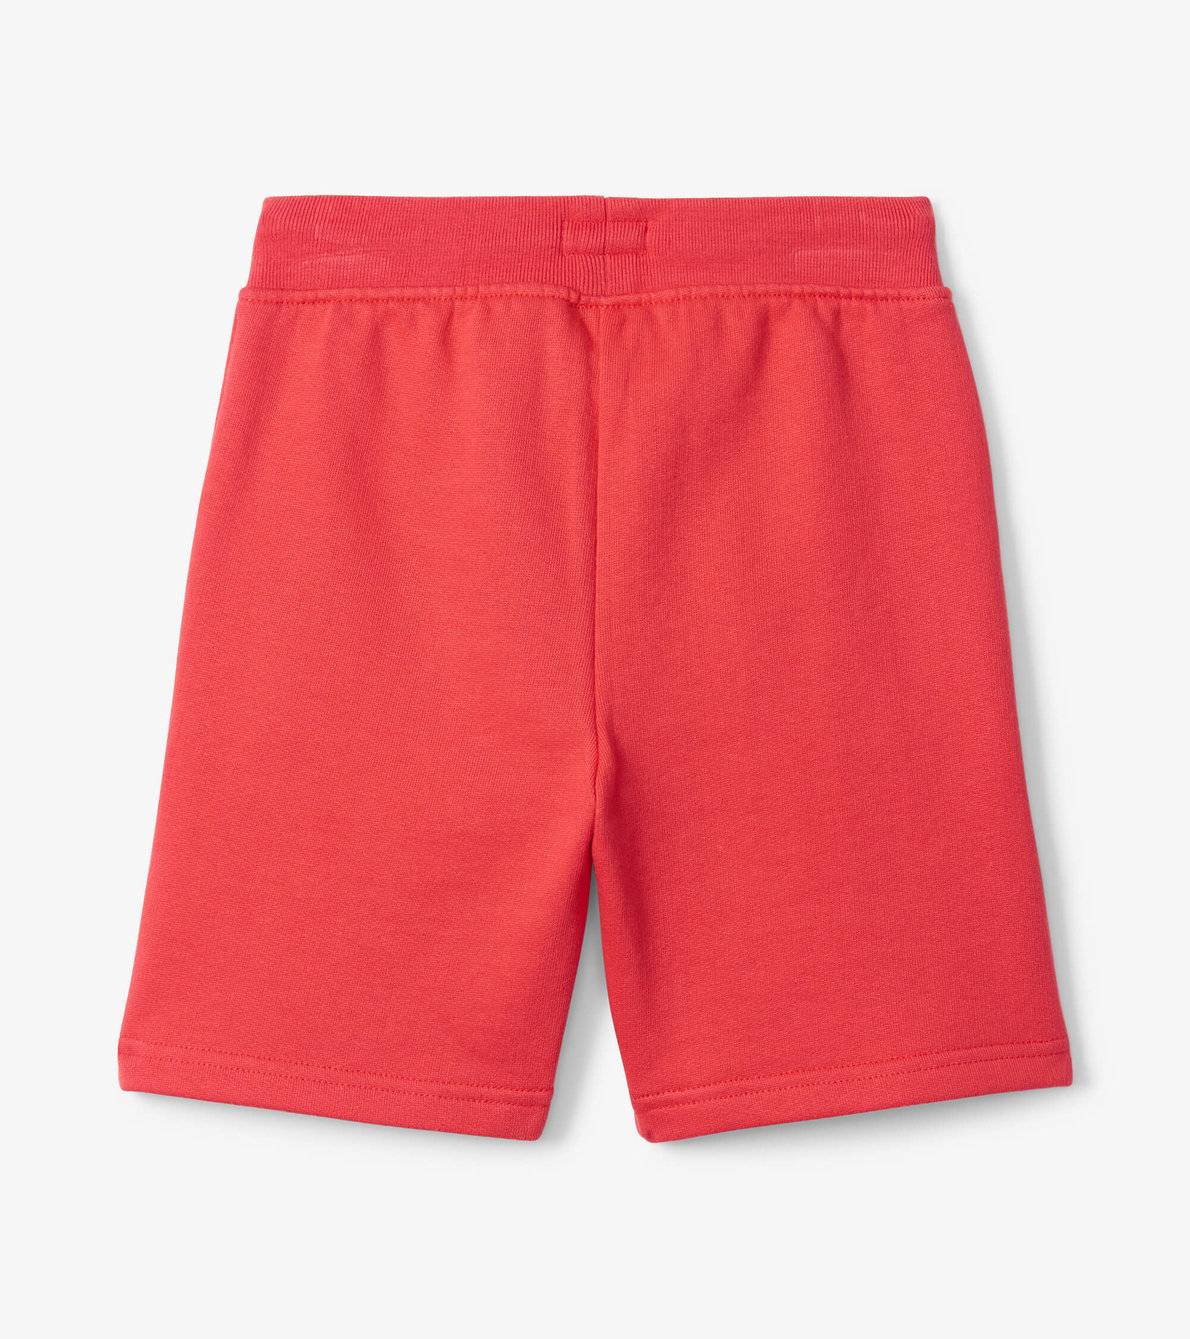 View larger image of Nautical Red Terry Shorts